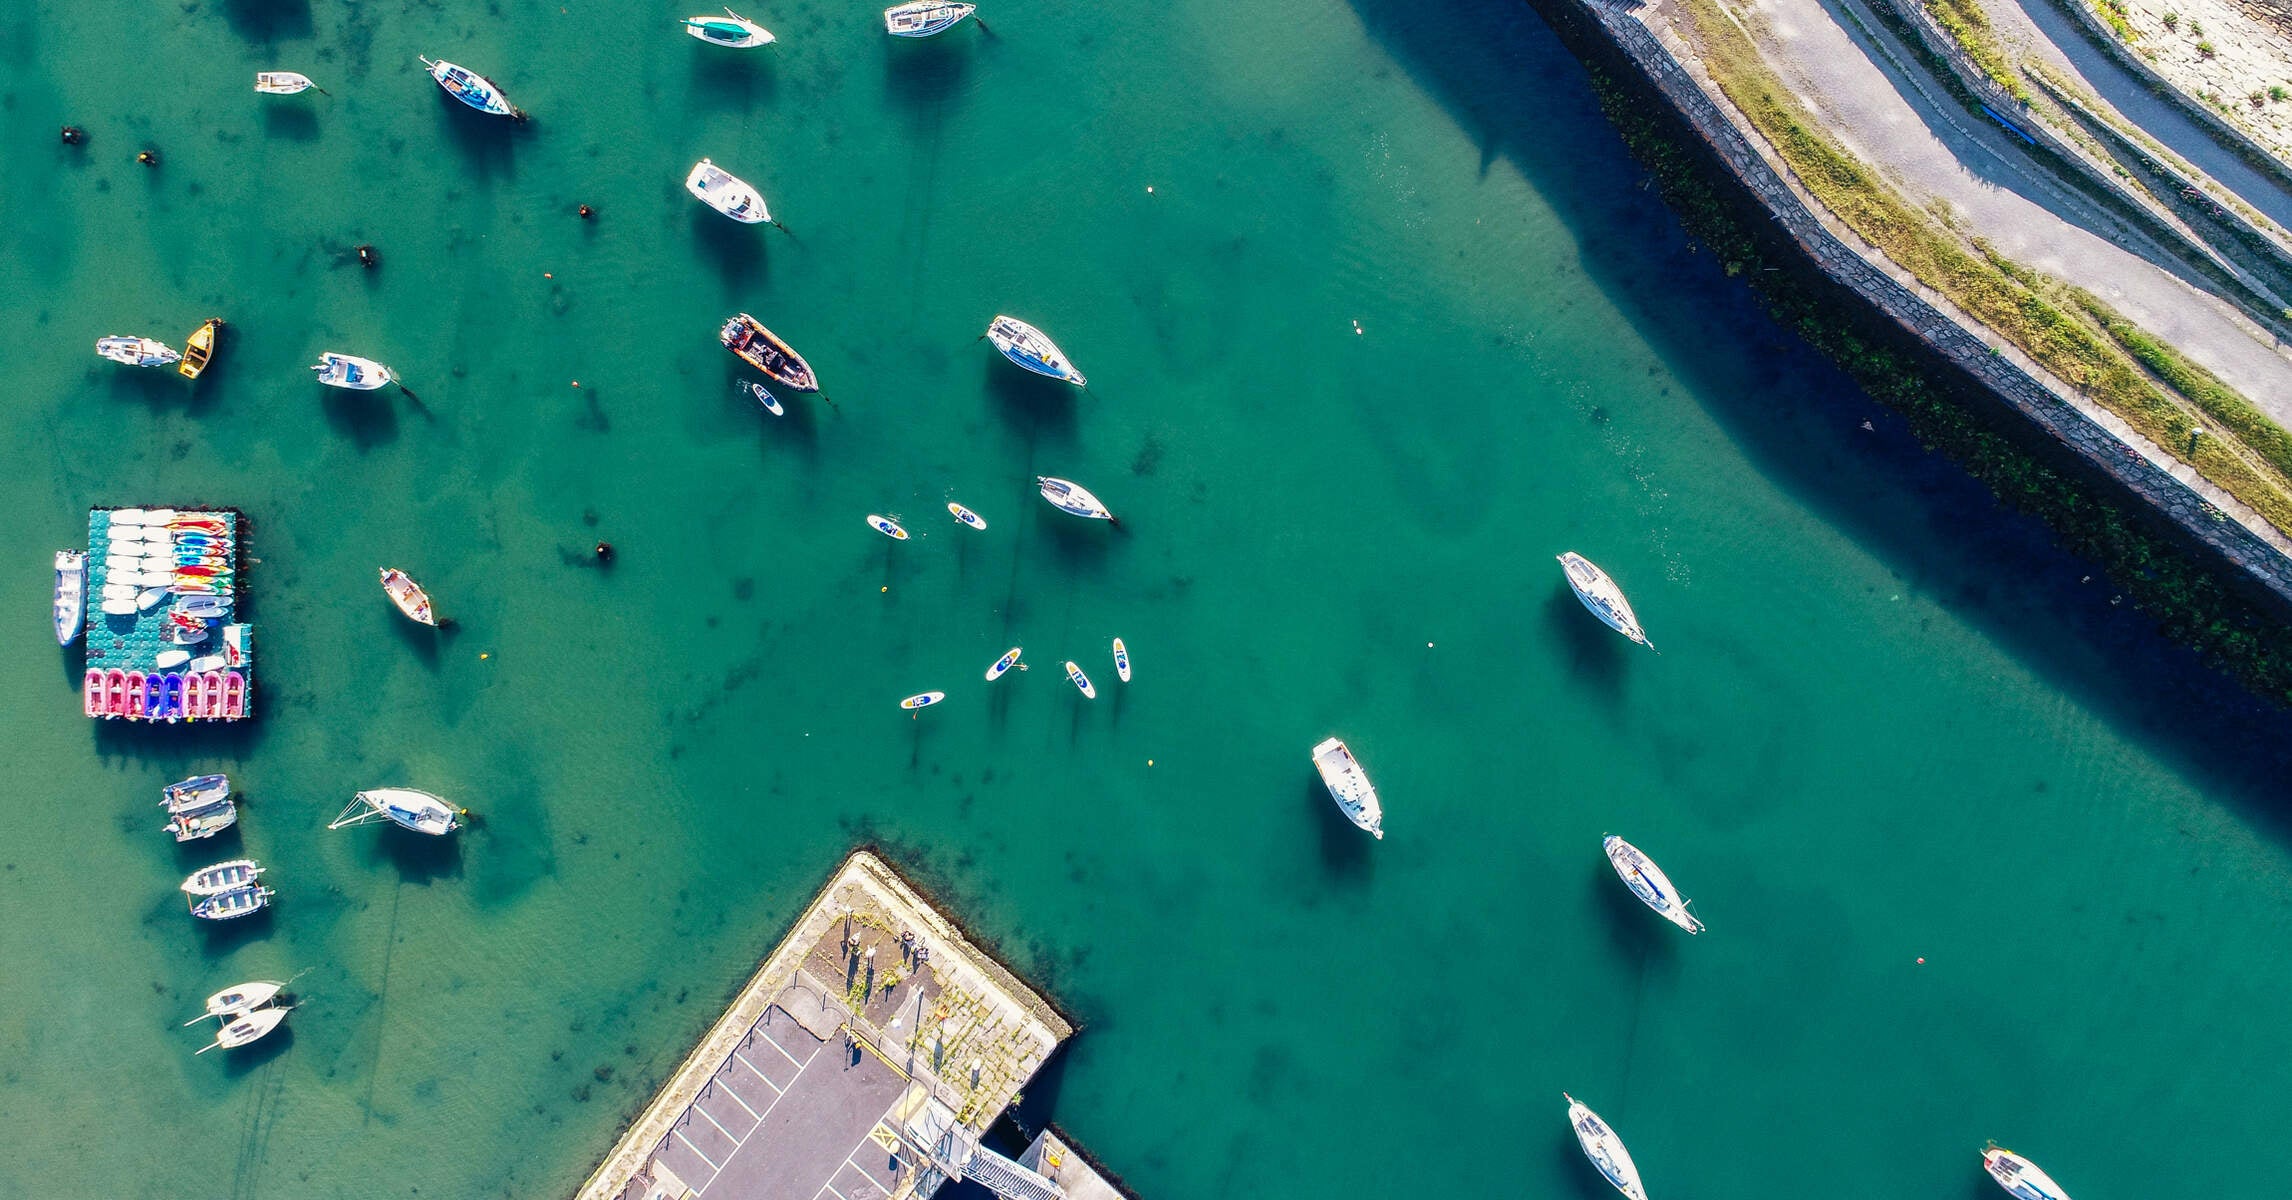 An aerial shot of the Dún Laoghaire Marina with different boats as well as people SUPing.